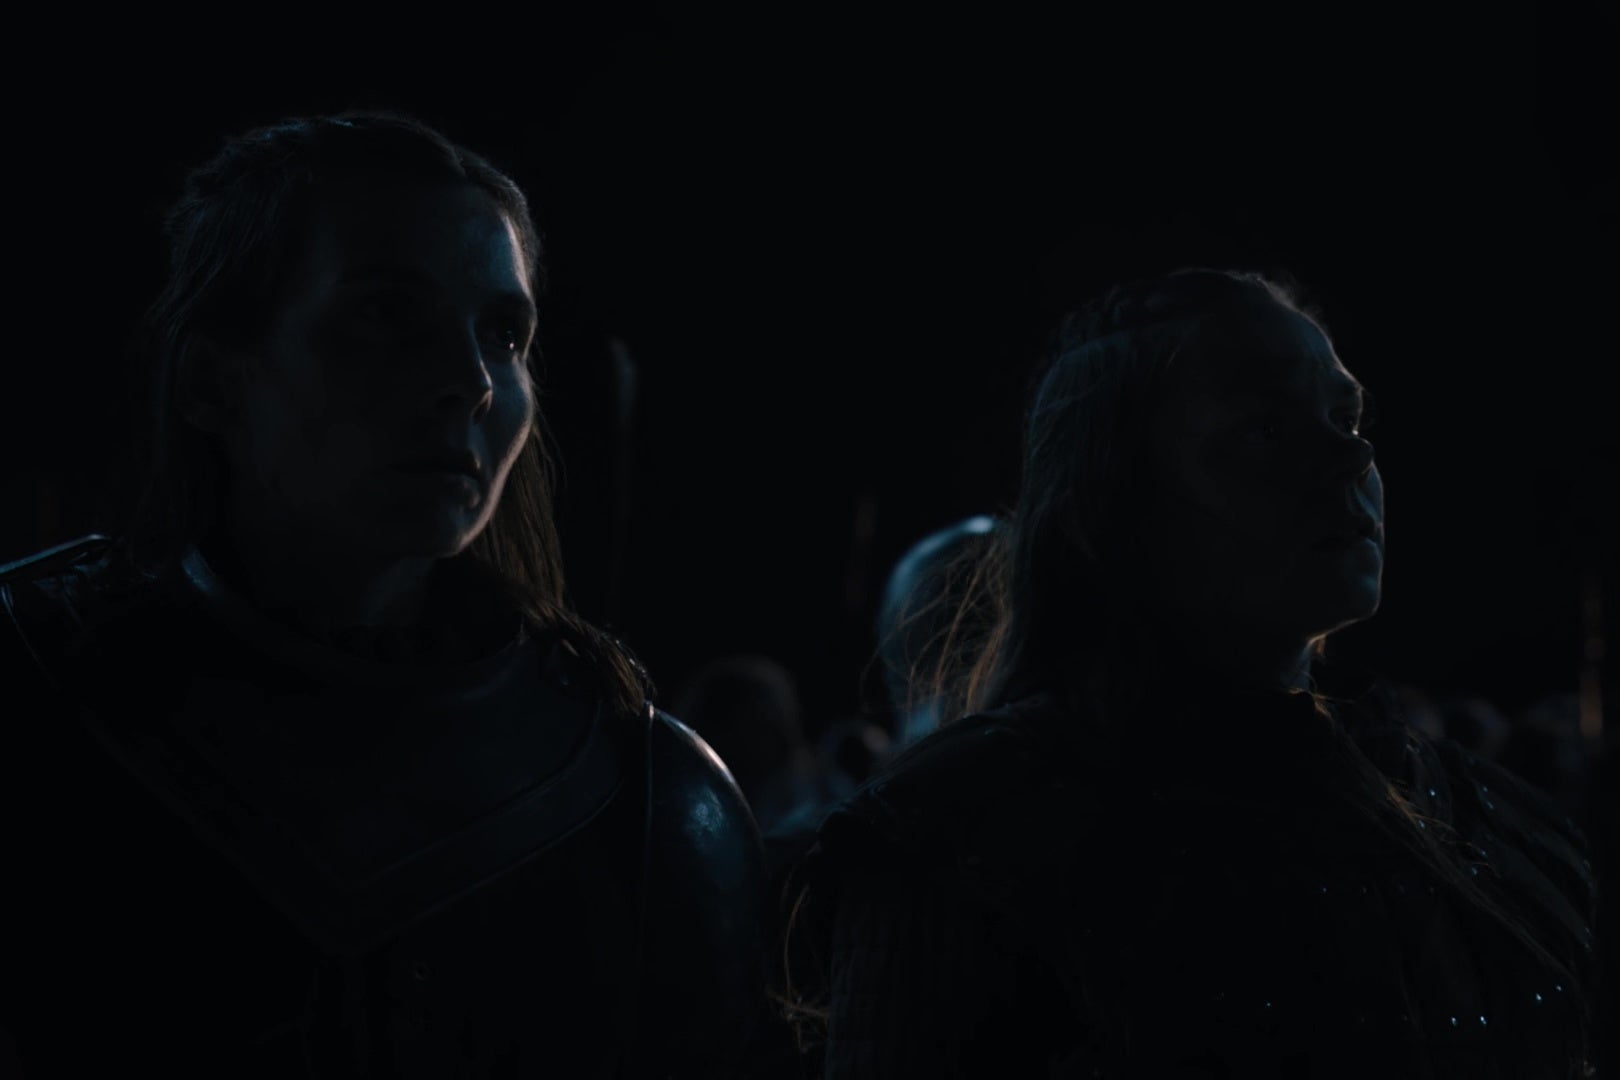 Two human Game of Thrones characters, staring out into darkness.